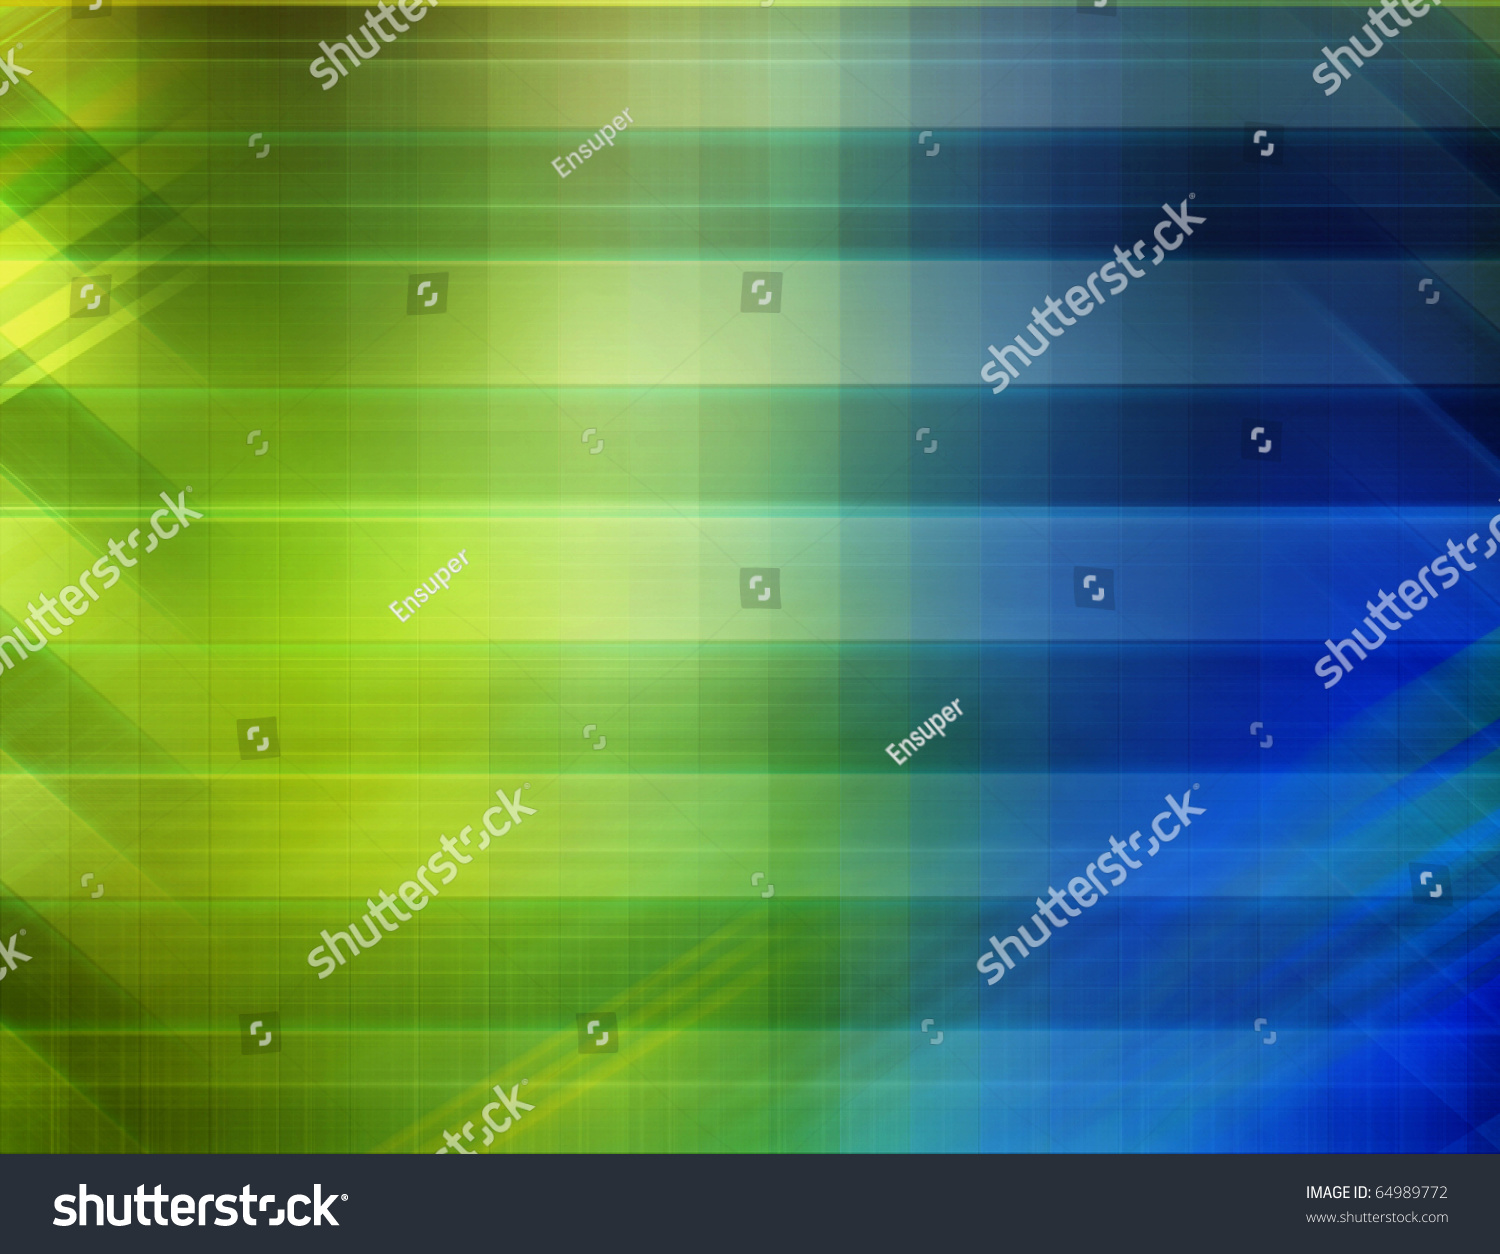 Green And Blue Background Stock Photo 64989772 : Shutterstock